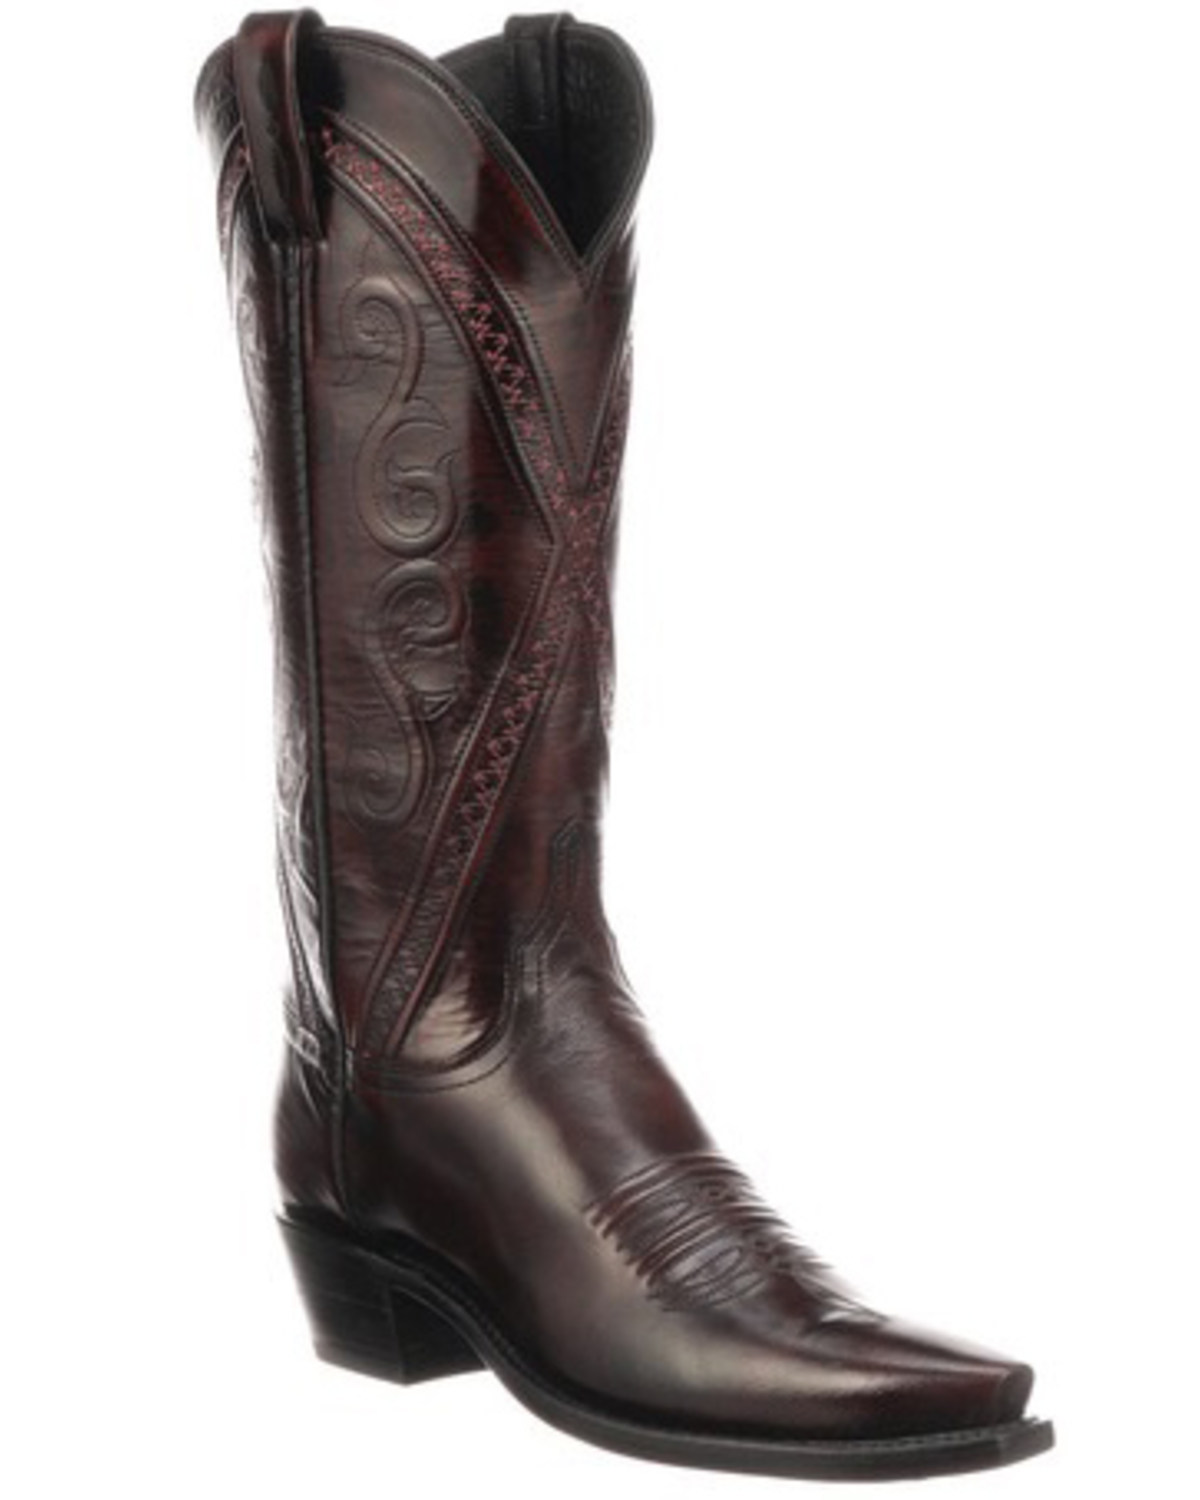 lucchese women's western boots